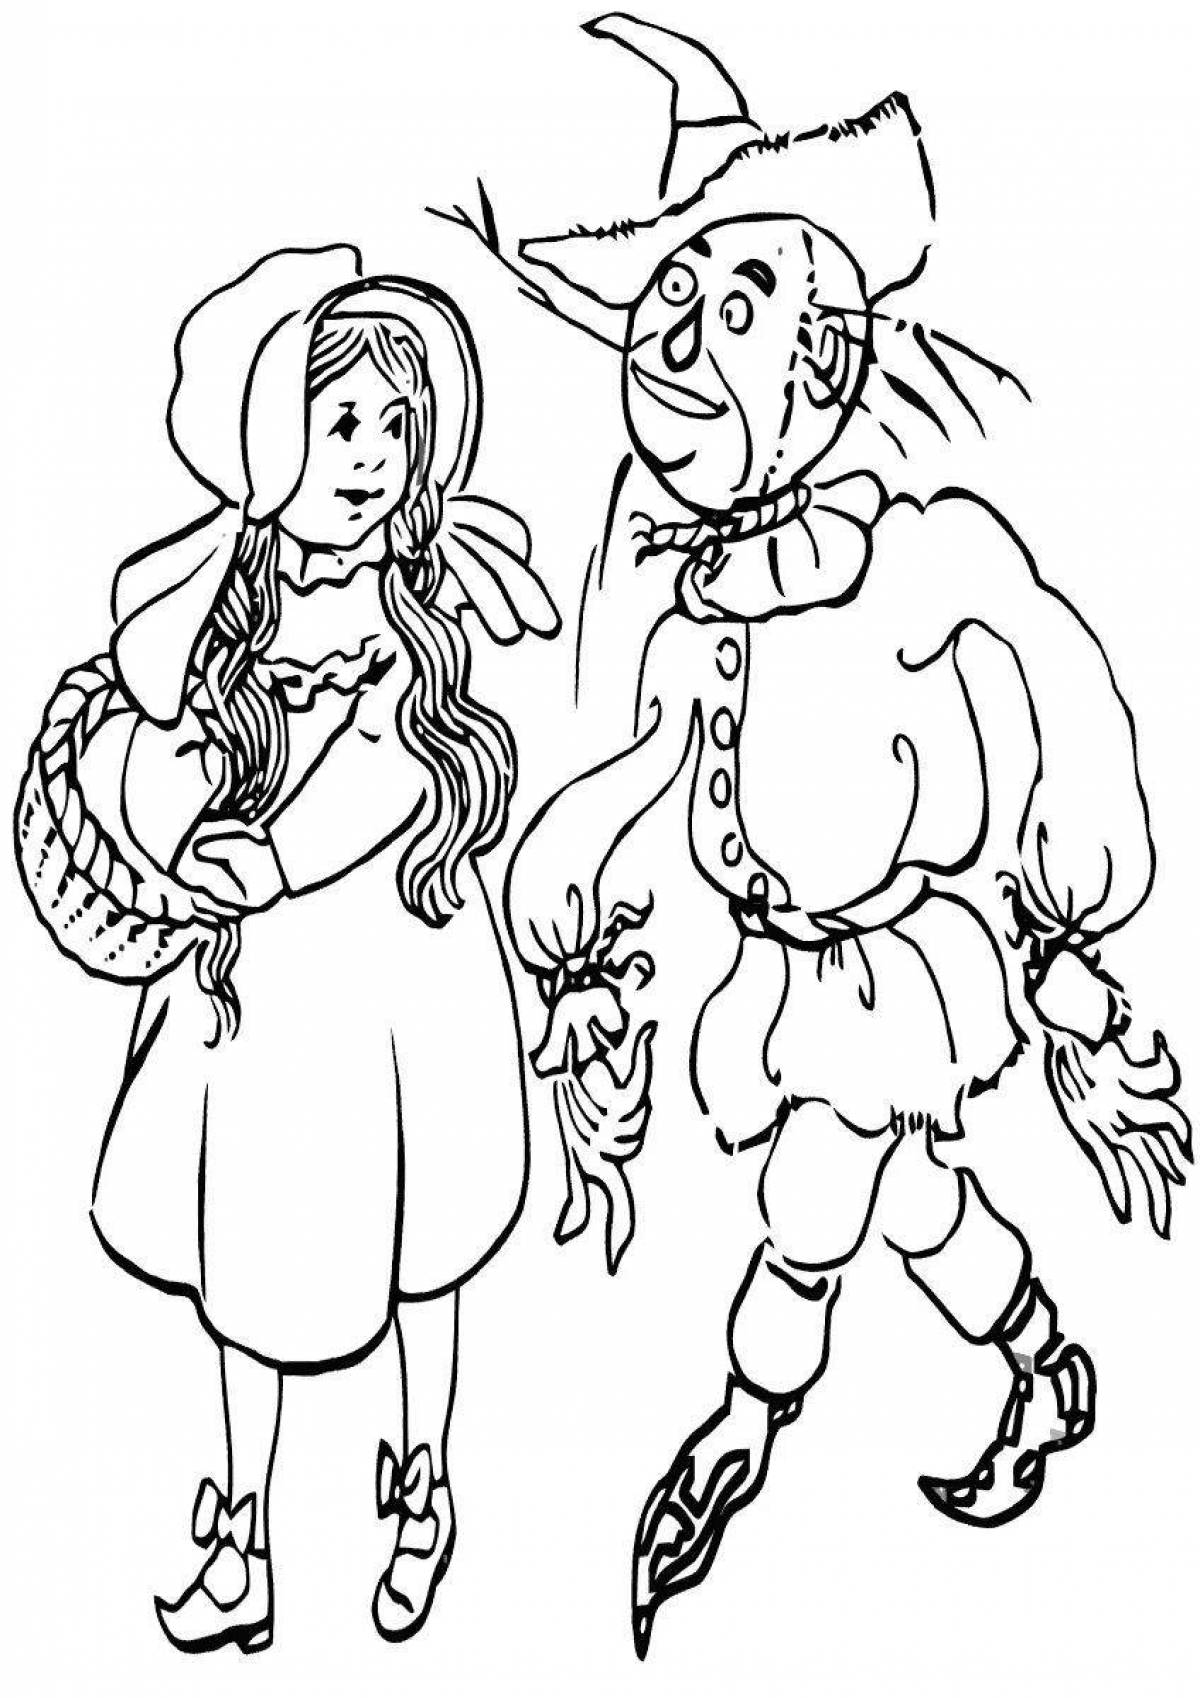 Coloring page funny wizard of oz